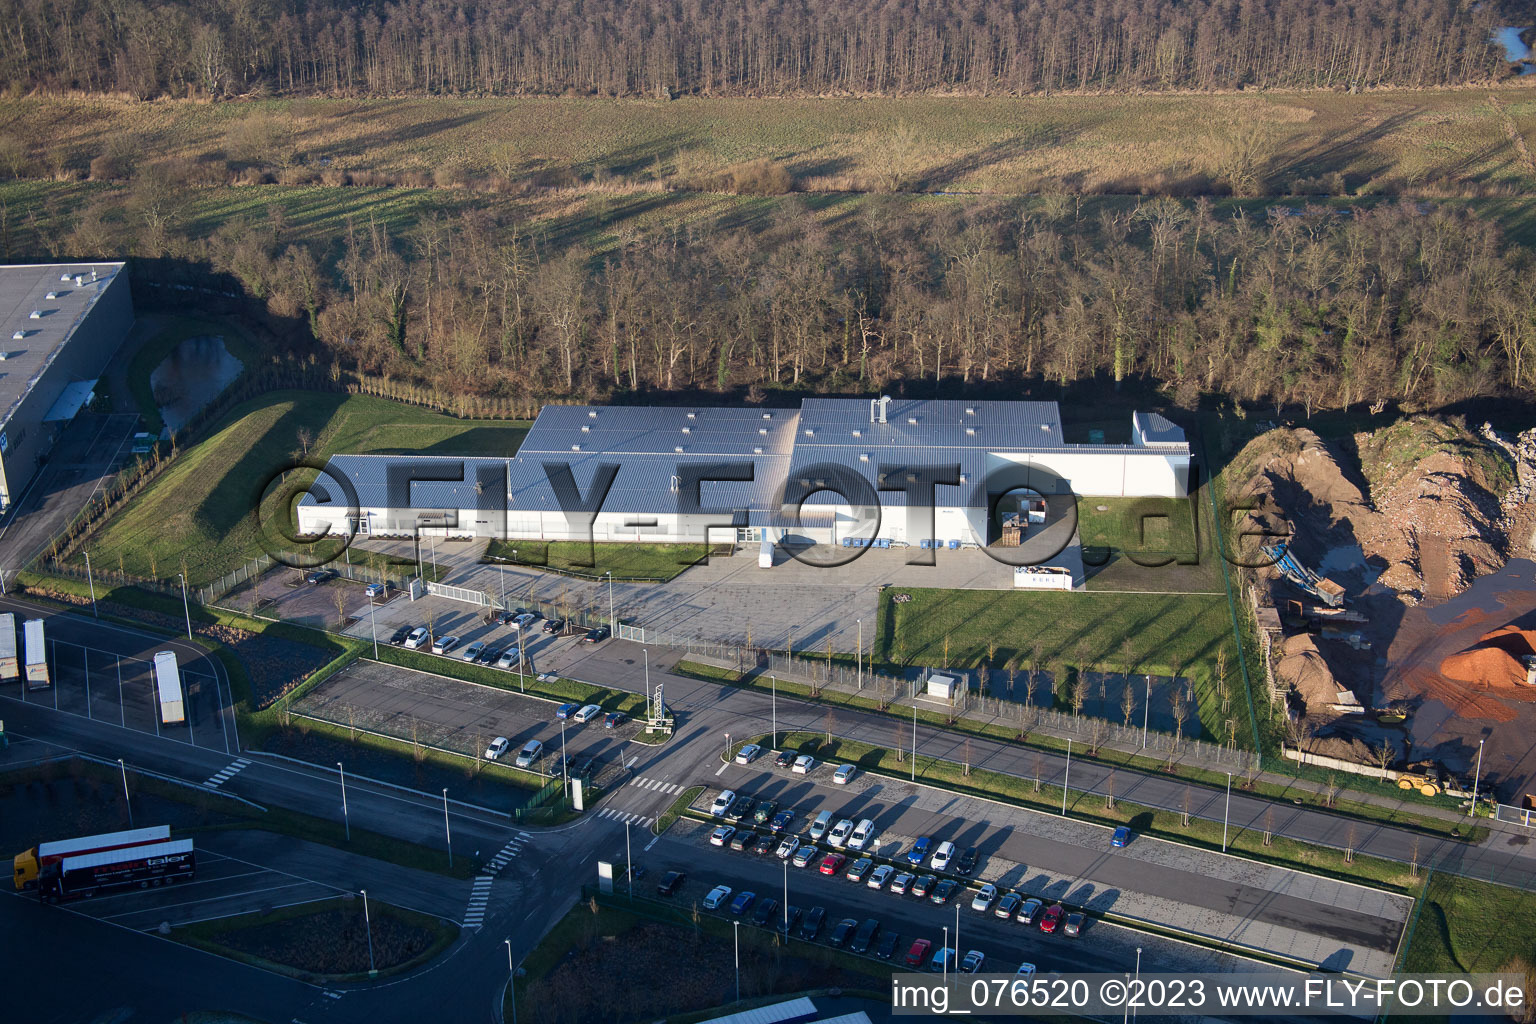 Horst industrial estate, Alfa Aesar GmbH in the district Minderslachen in Kandel in the state Rhineland-Palatinate, Germany seen from a drone